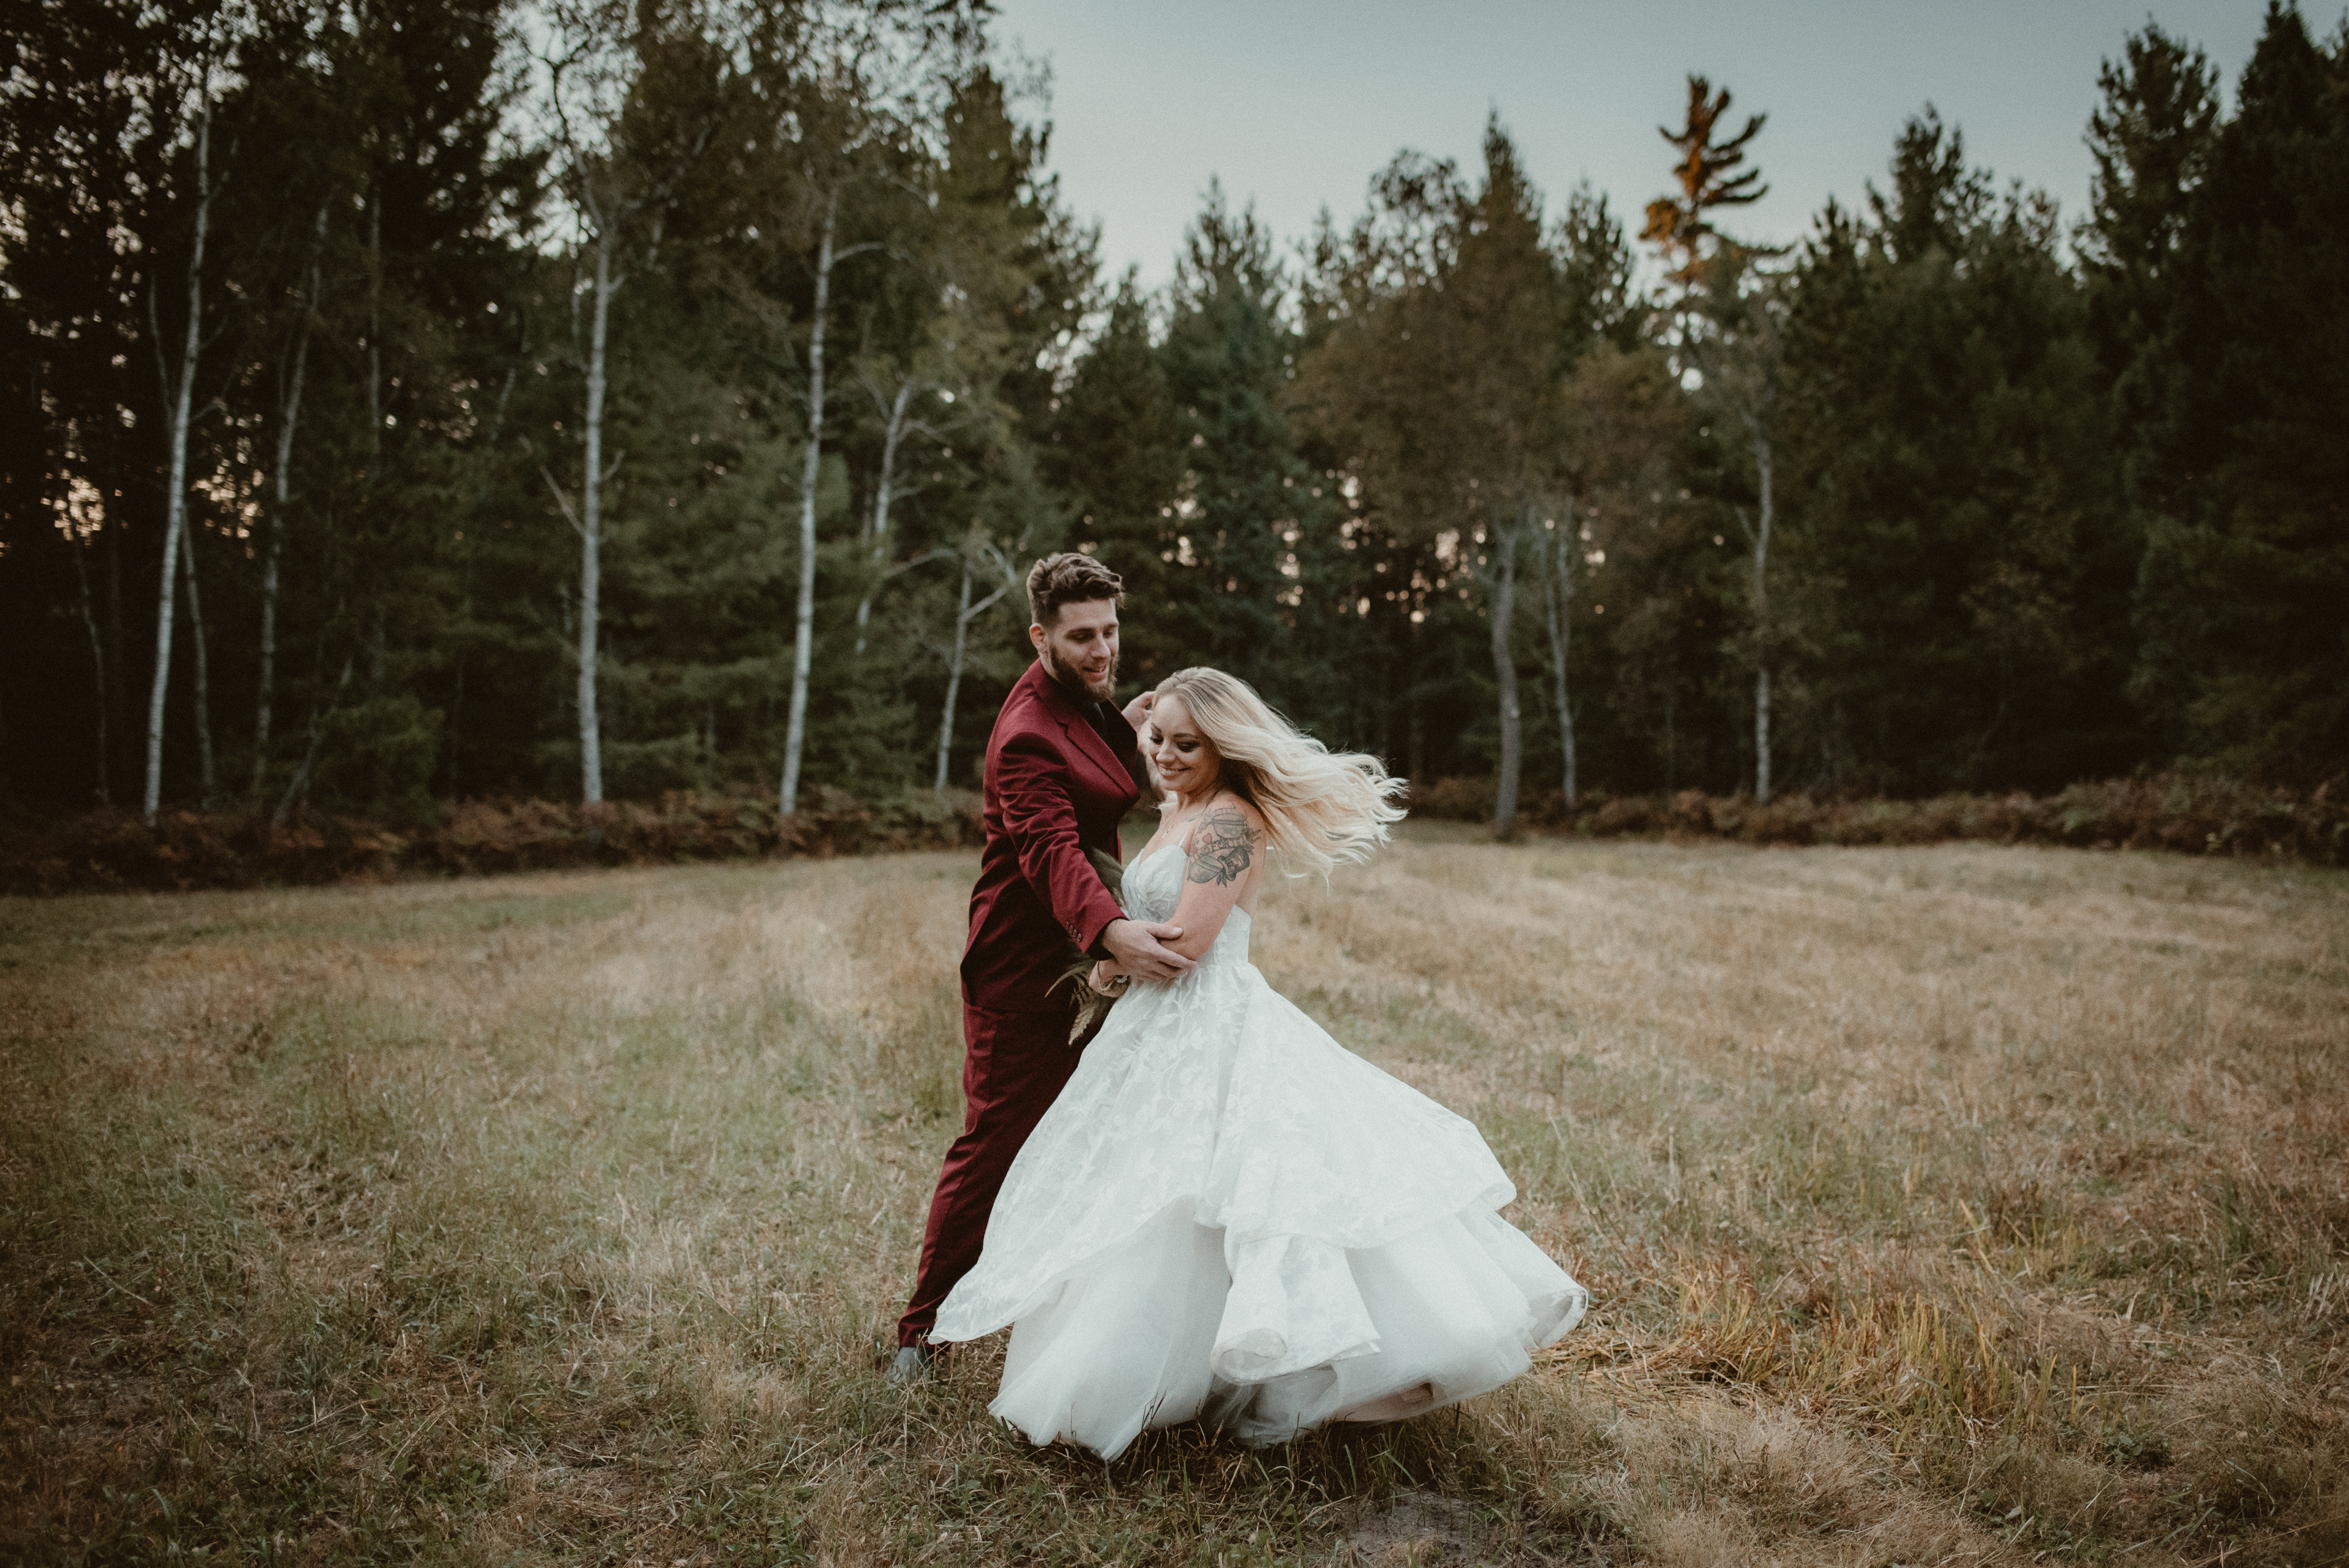 Sunset dance during wedding portraits. Couple in wedding attire dancing in the woods in Roscommon, MI